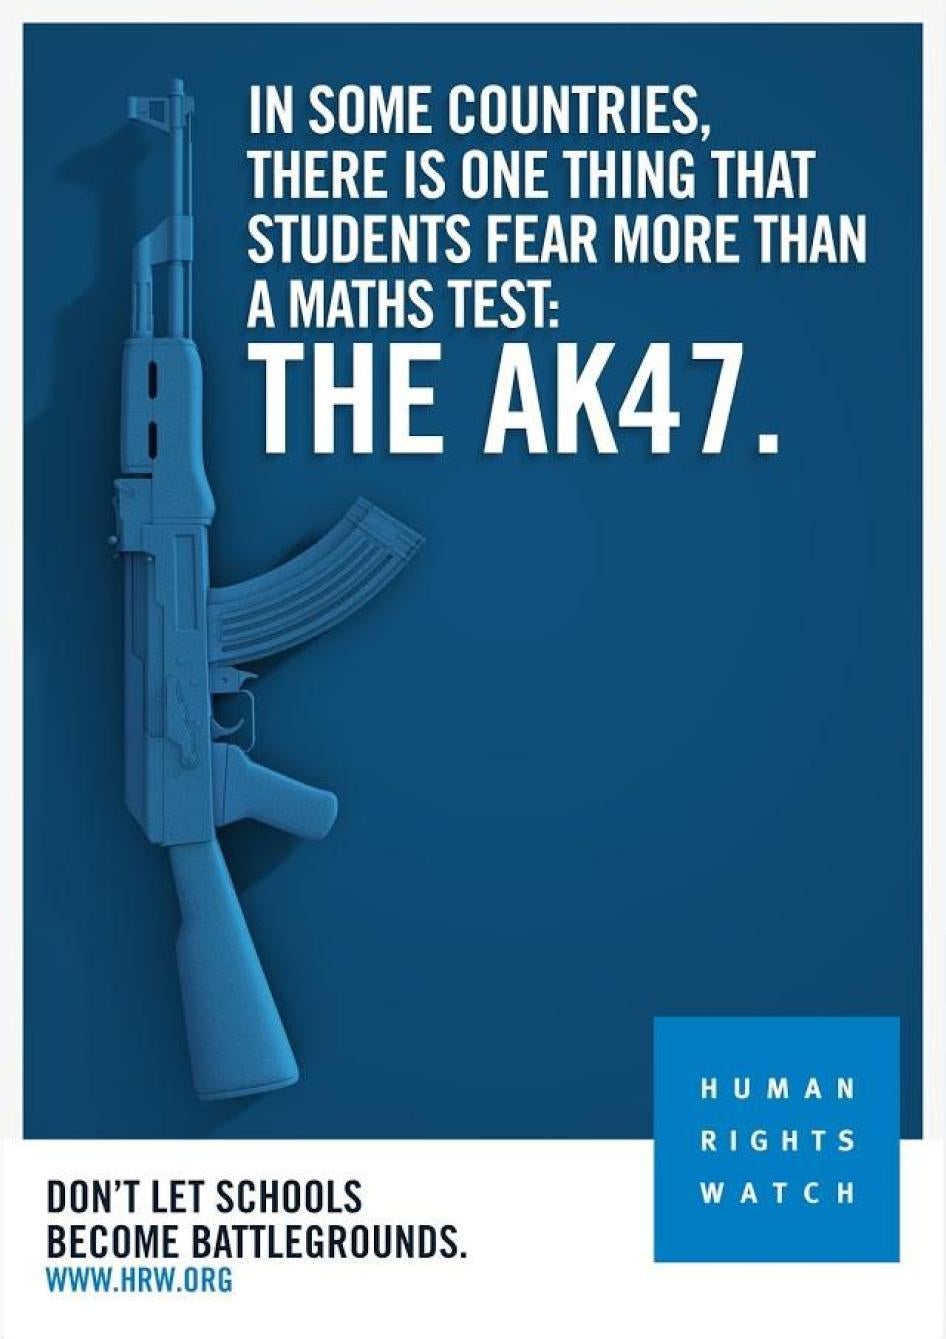 In some countries, there is one thing that students fear more than a maths test: the AK47